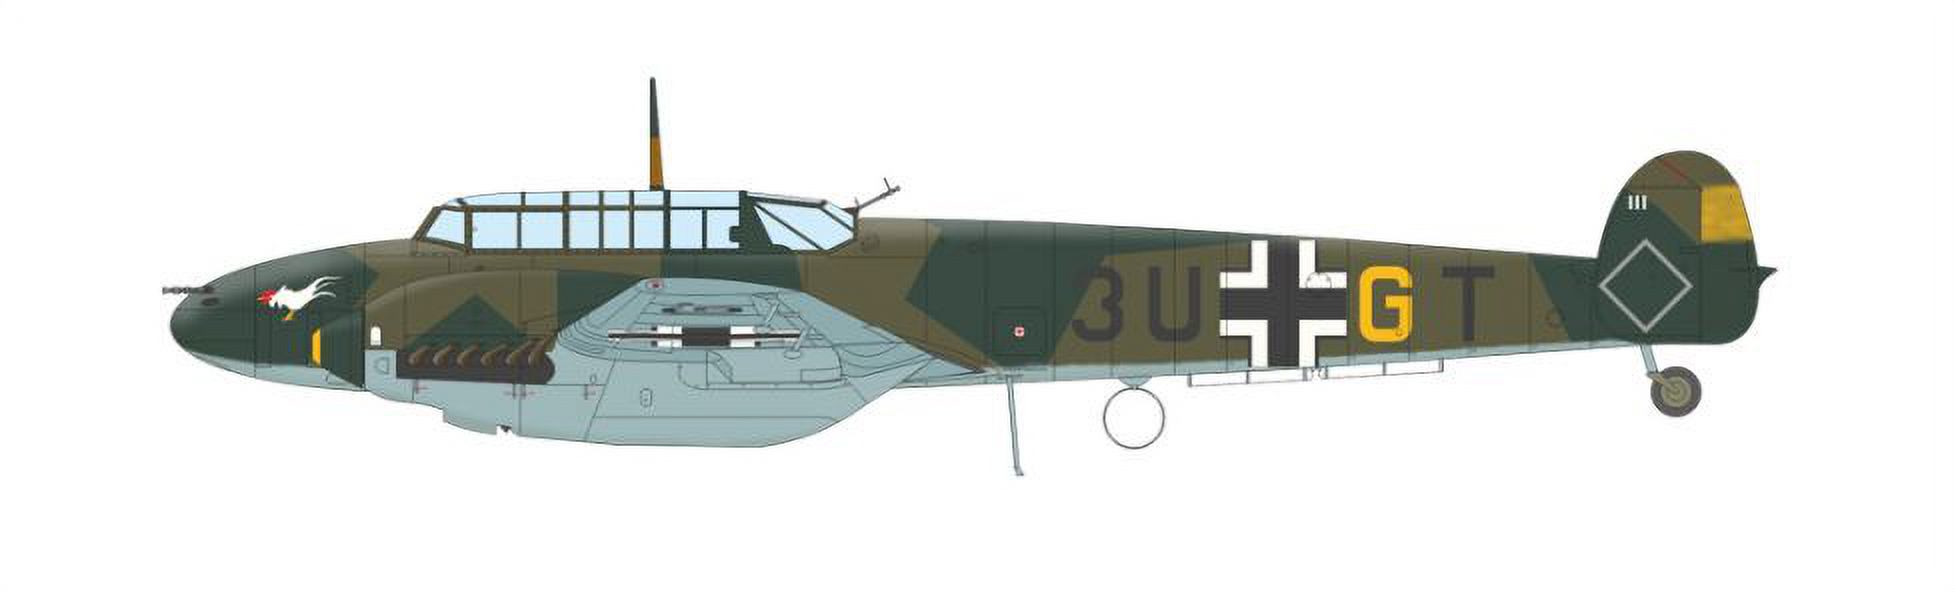 Bf 110C New - image 4 of 5